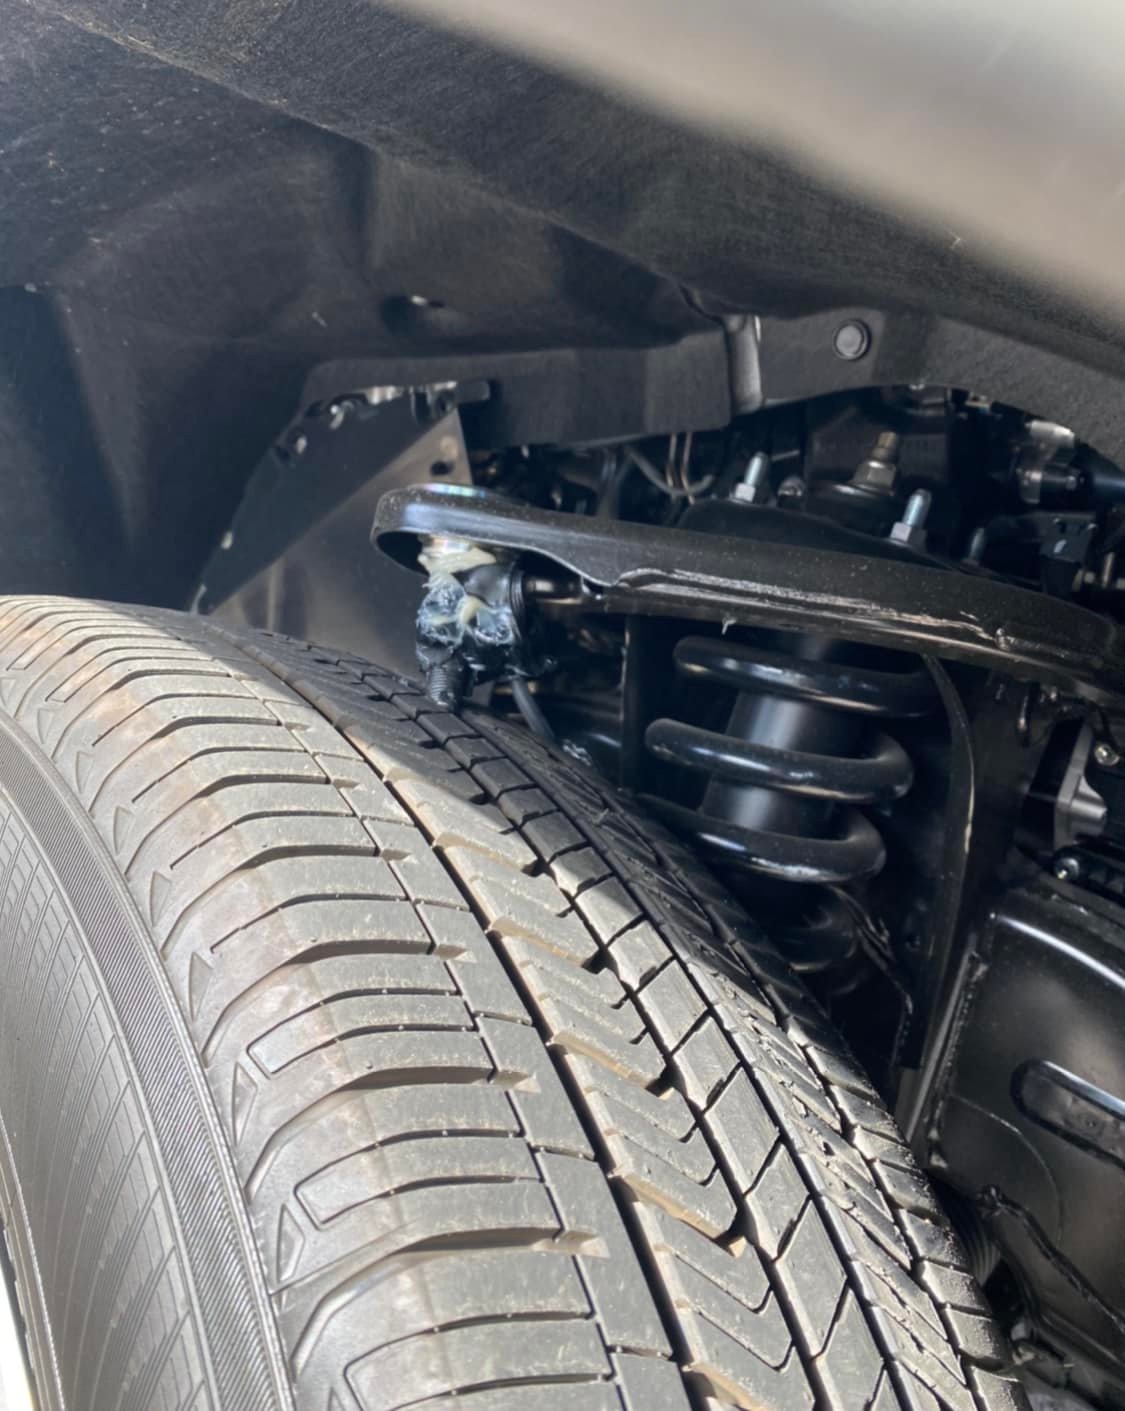 2022 Toyota Tundra Control Arm Bolt Fails Catastrophically, Owner Isn’t